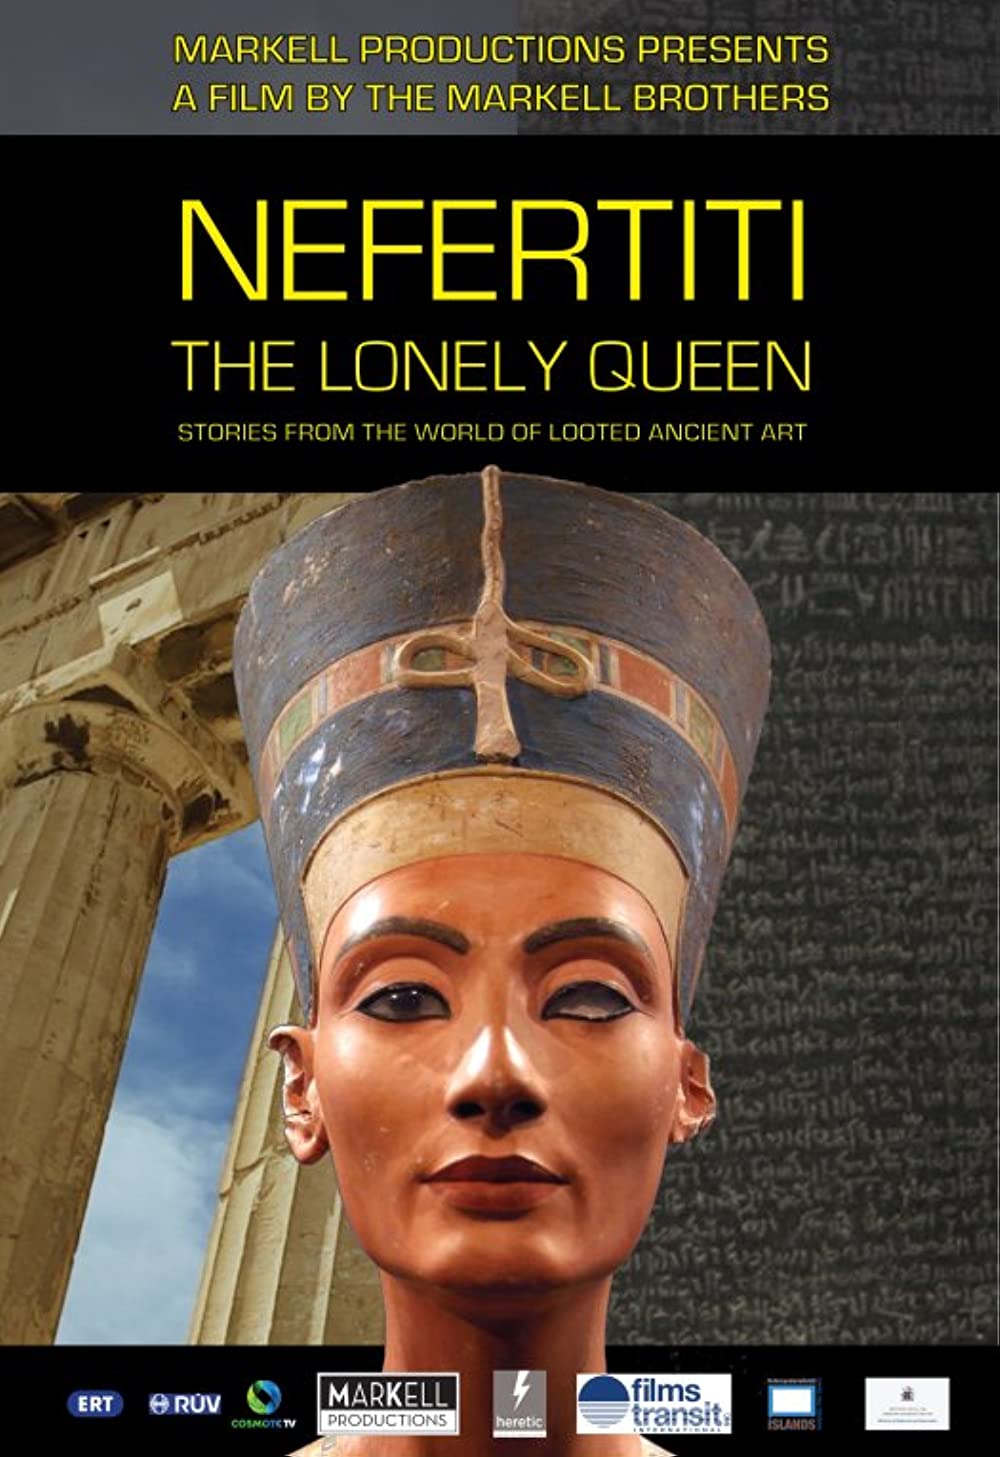 Nefertiti, the Lonely Queen: Stories from the World of Looted Ancient Art